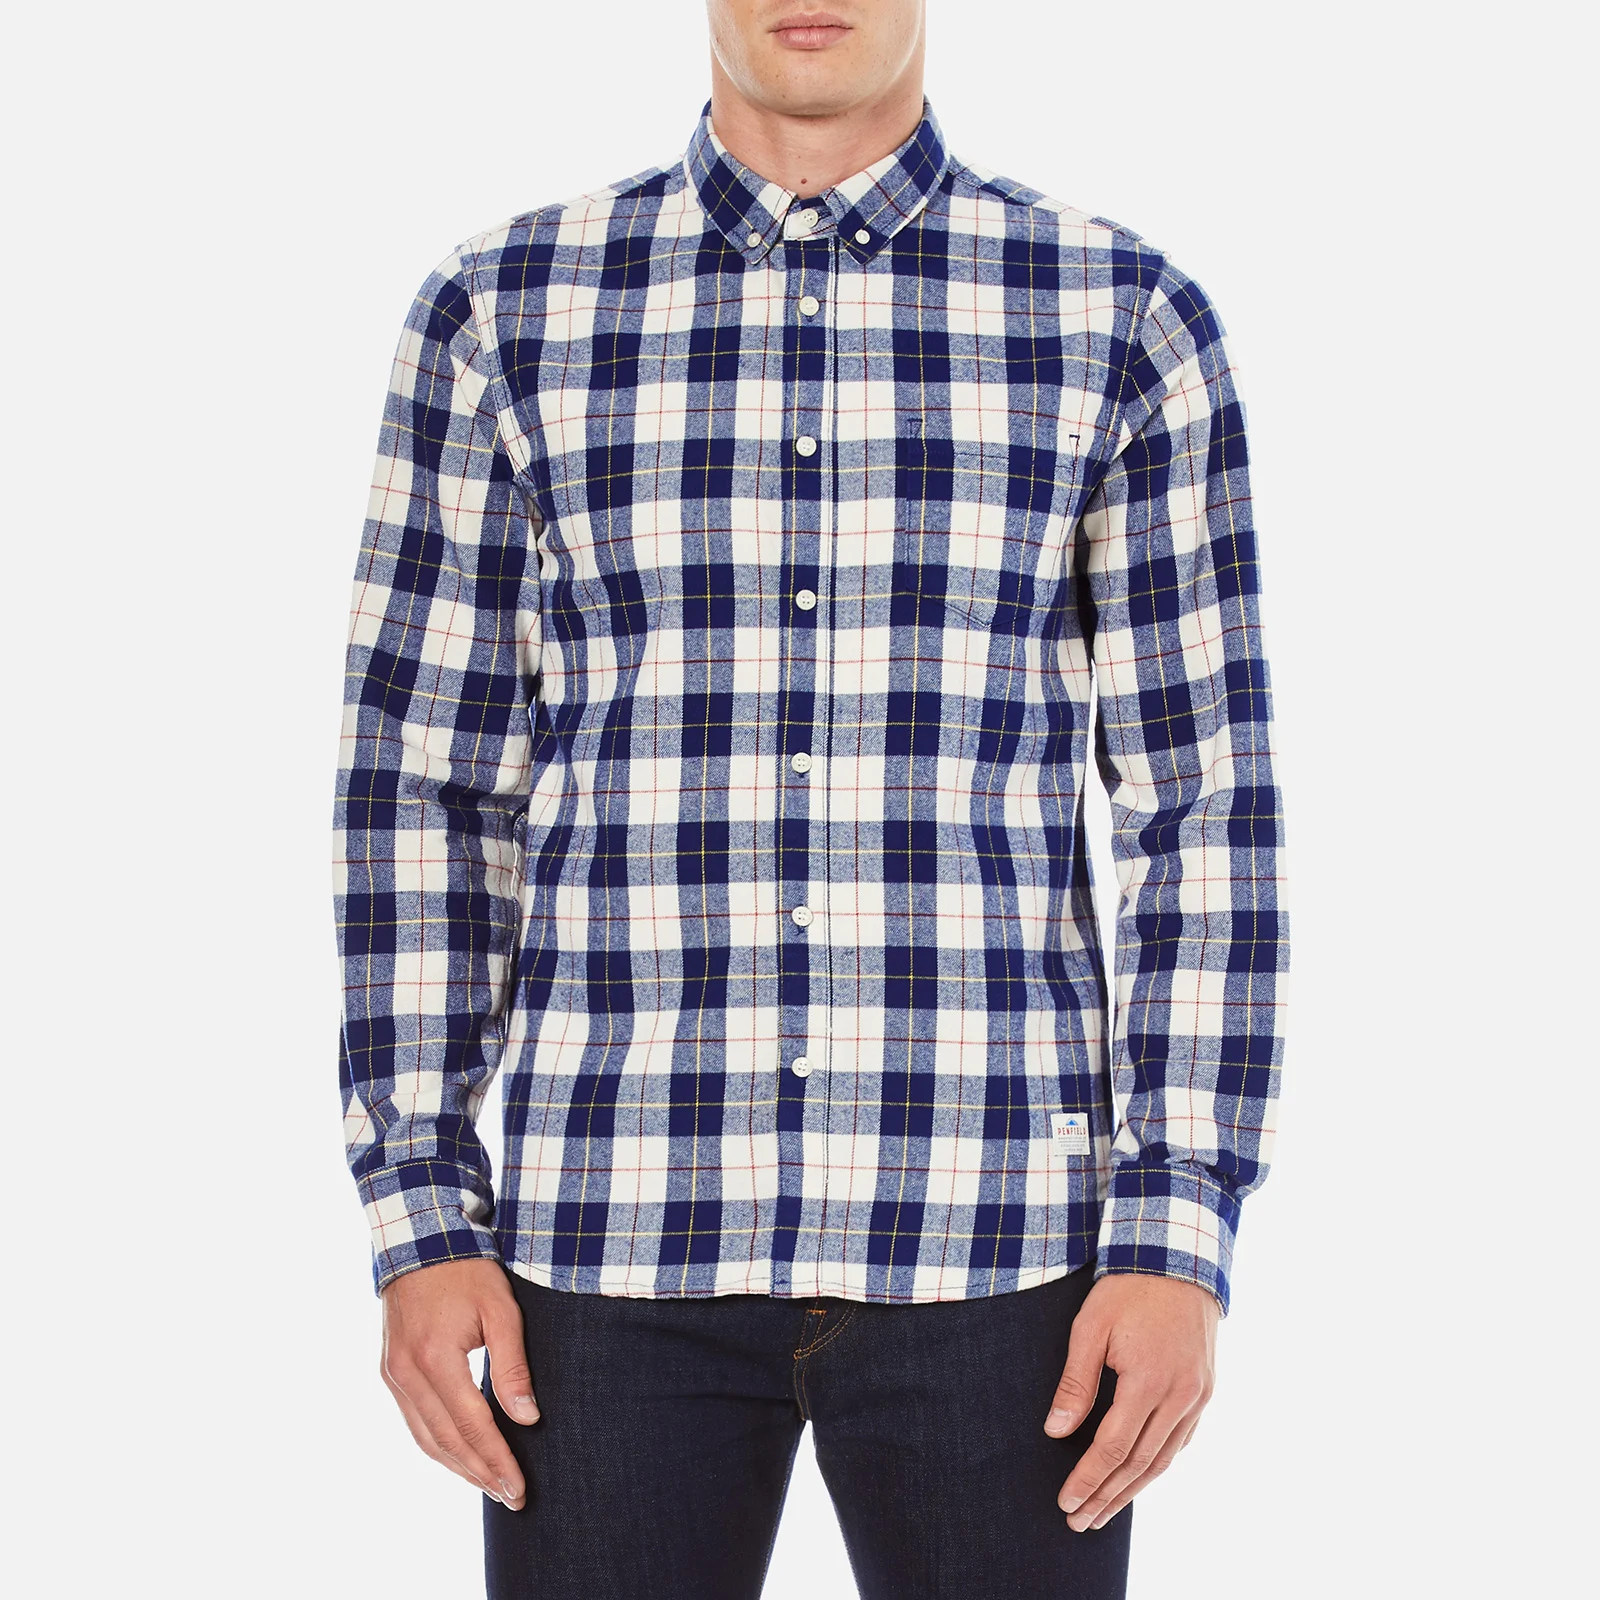 Penfield Men's Pearson Check Shirt - Navy Image 1